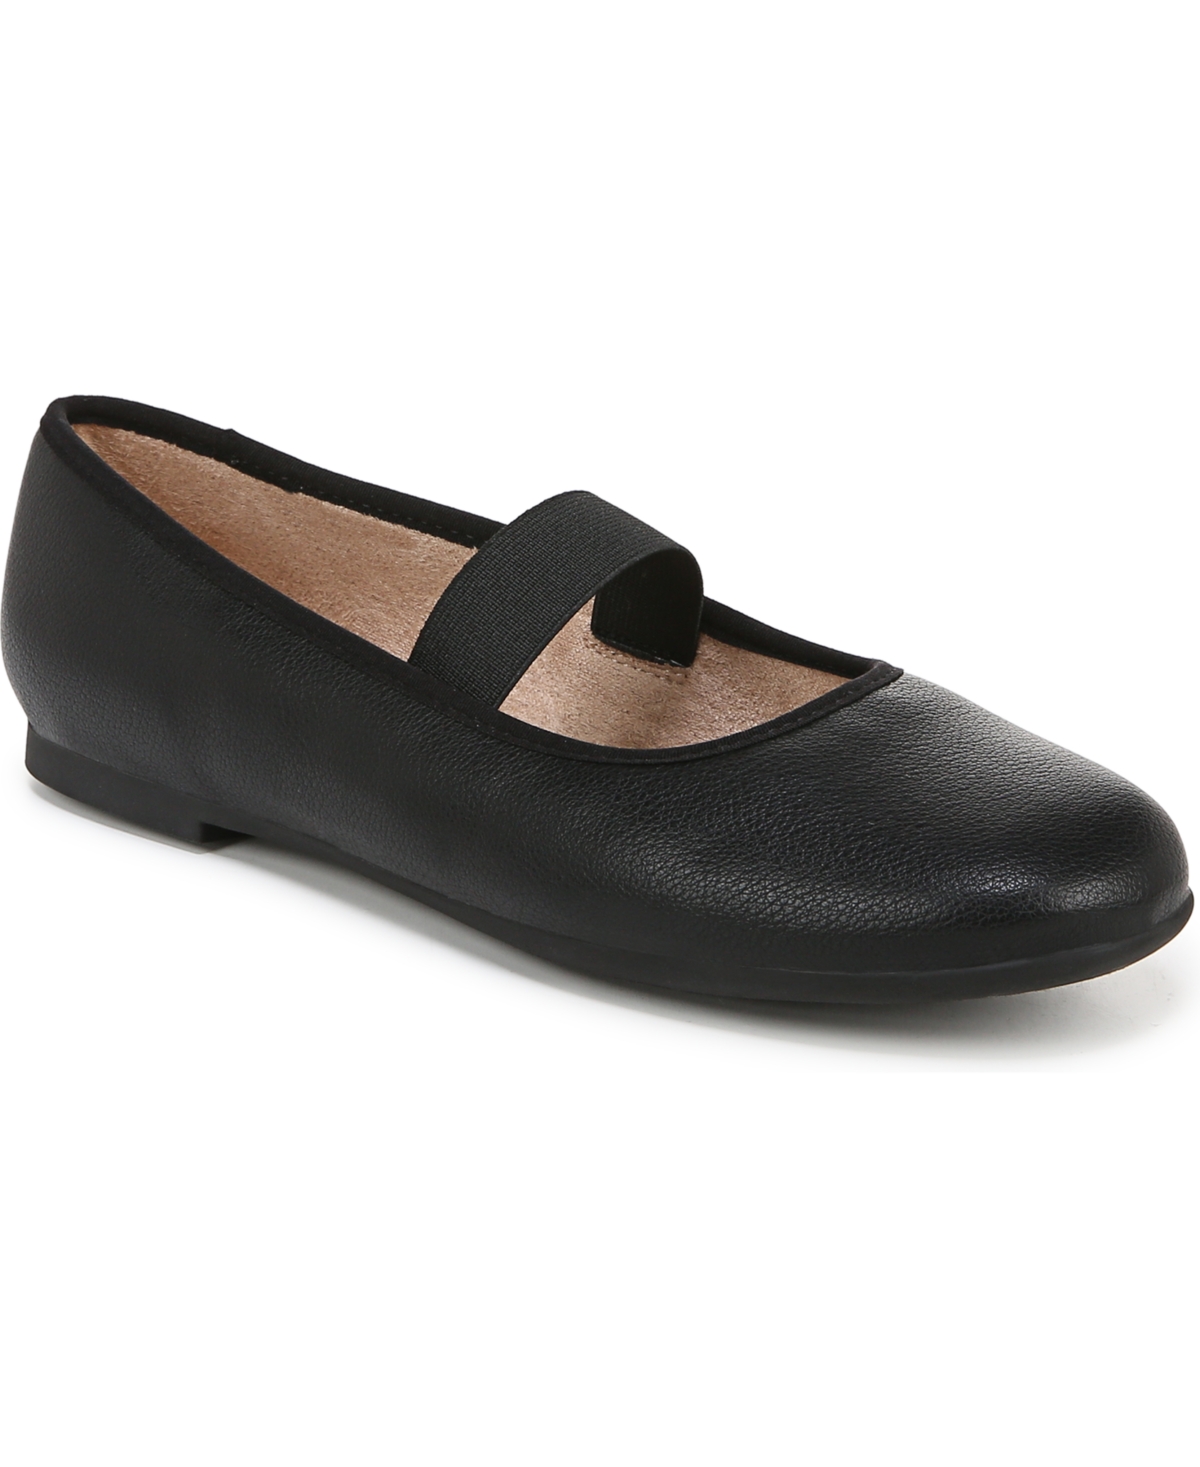 Brilliant May Jane Ballet Flats - Black Faux Leather